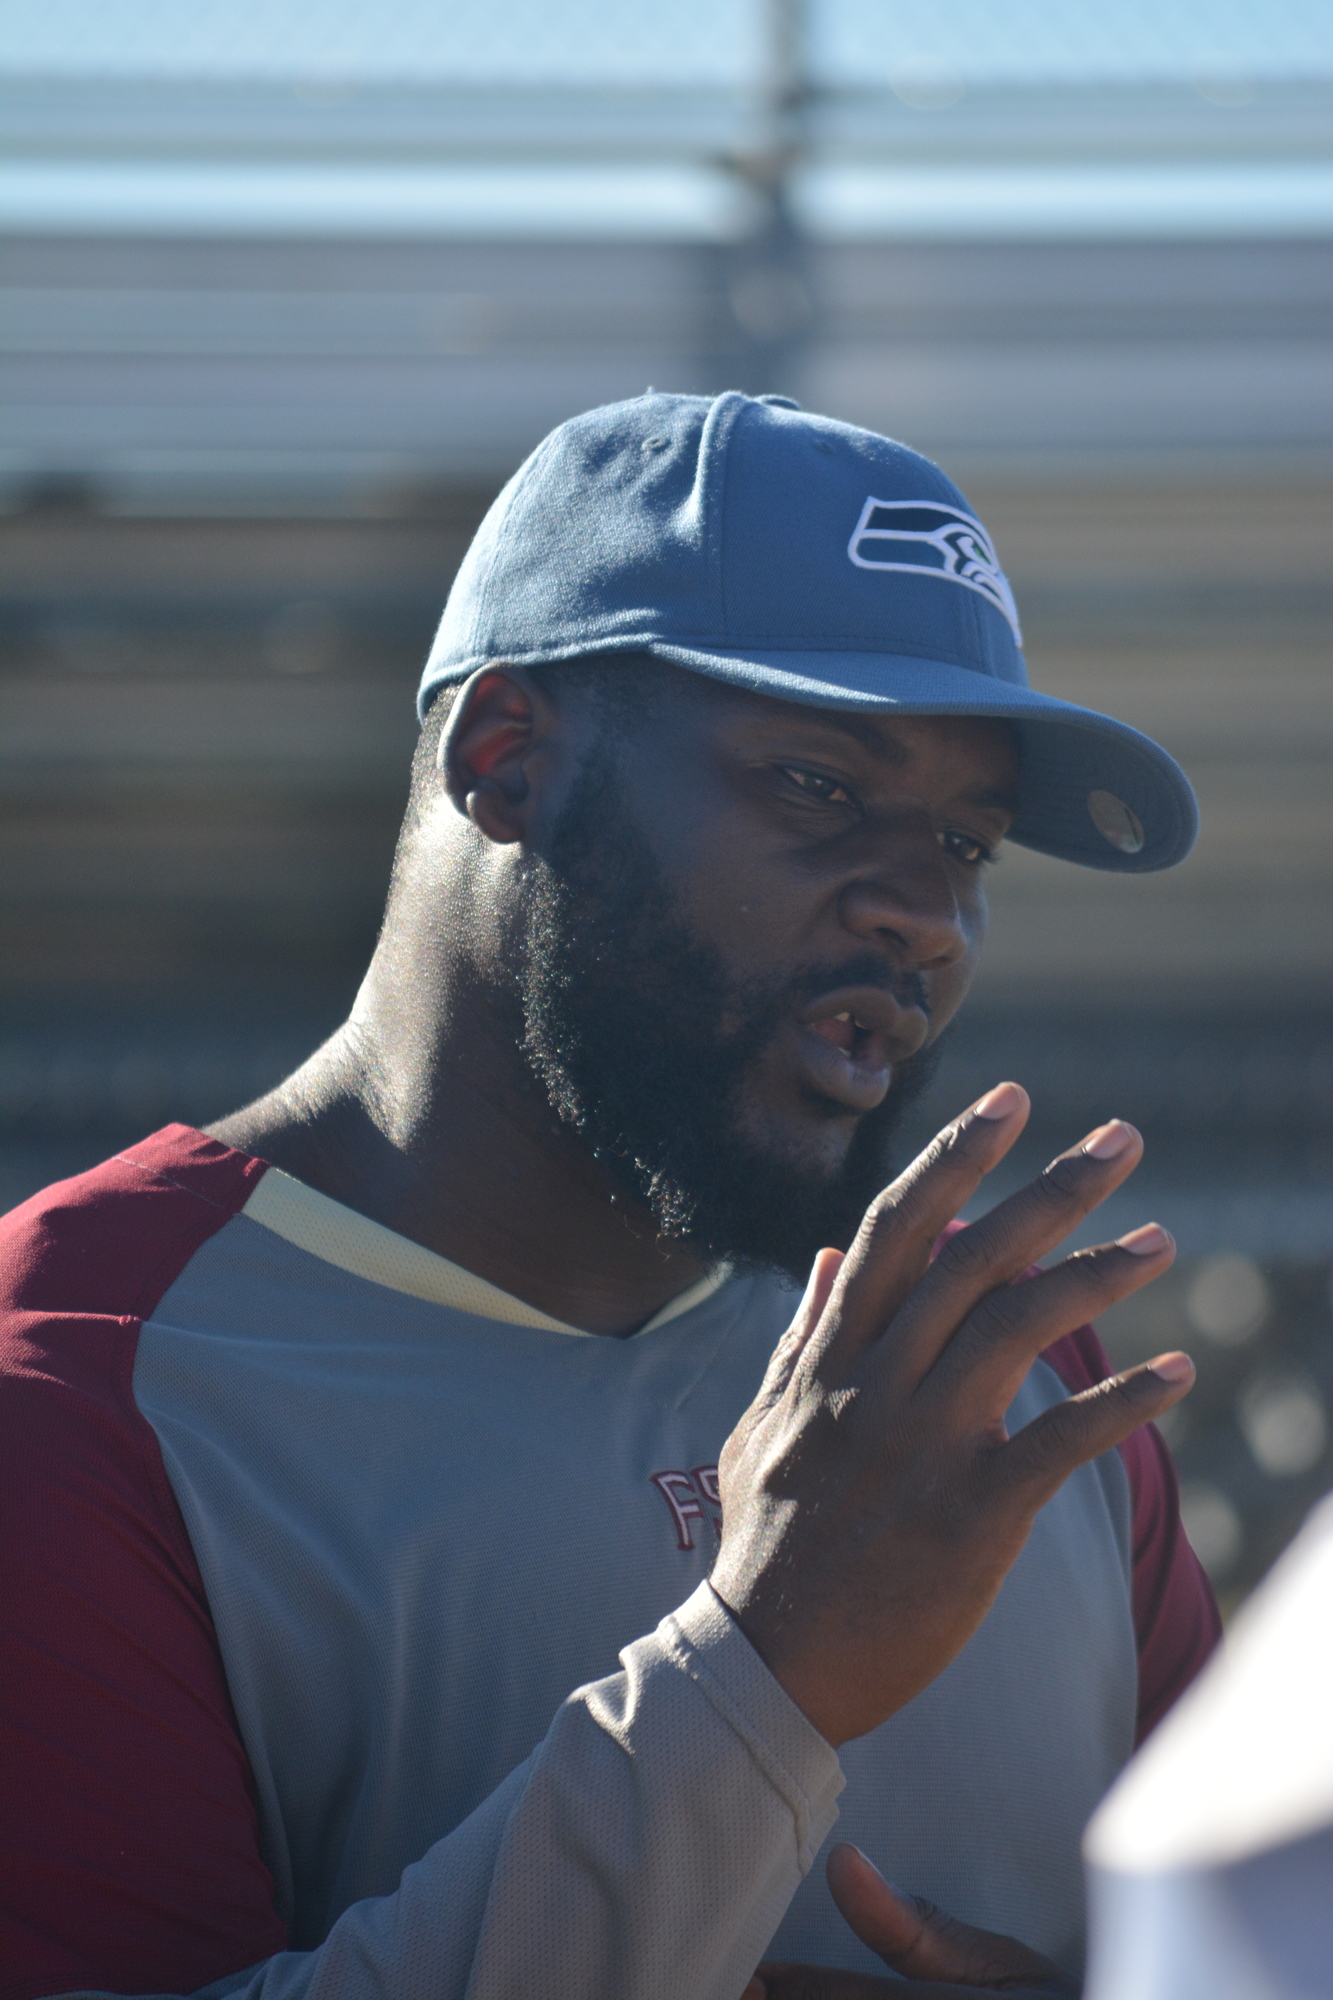 Booker interim football coach Dumaka Atkins has instilled the program with discipline and accountability, said athletic director Philip Helmuth.